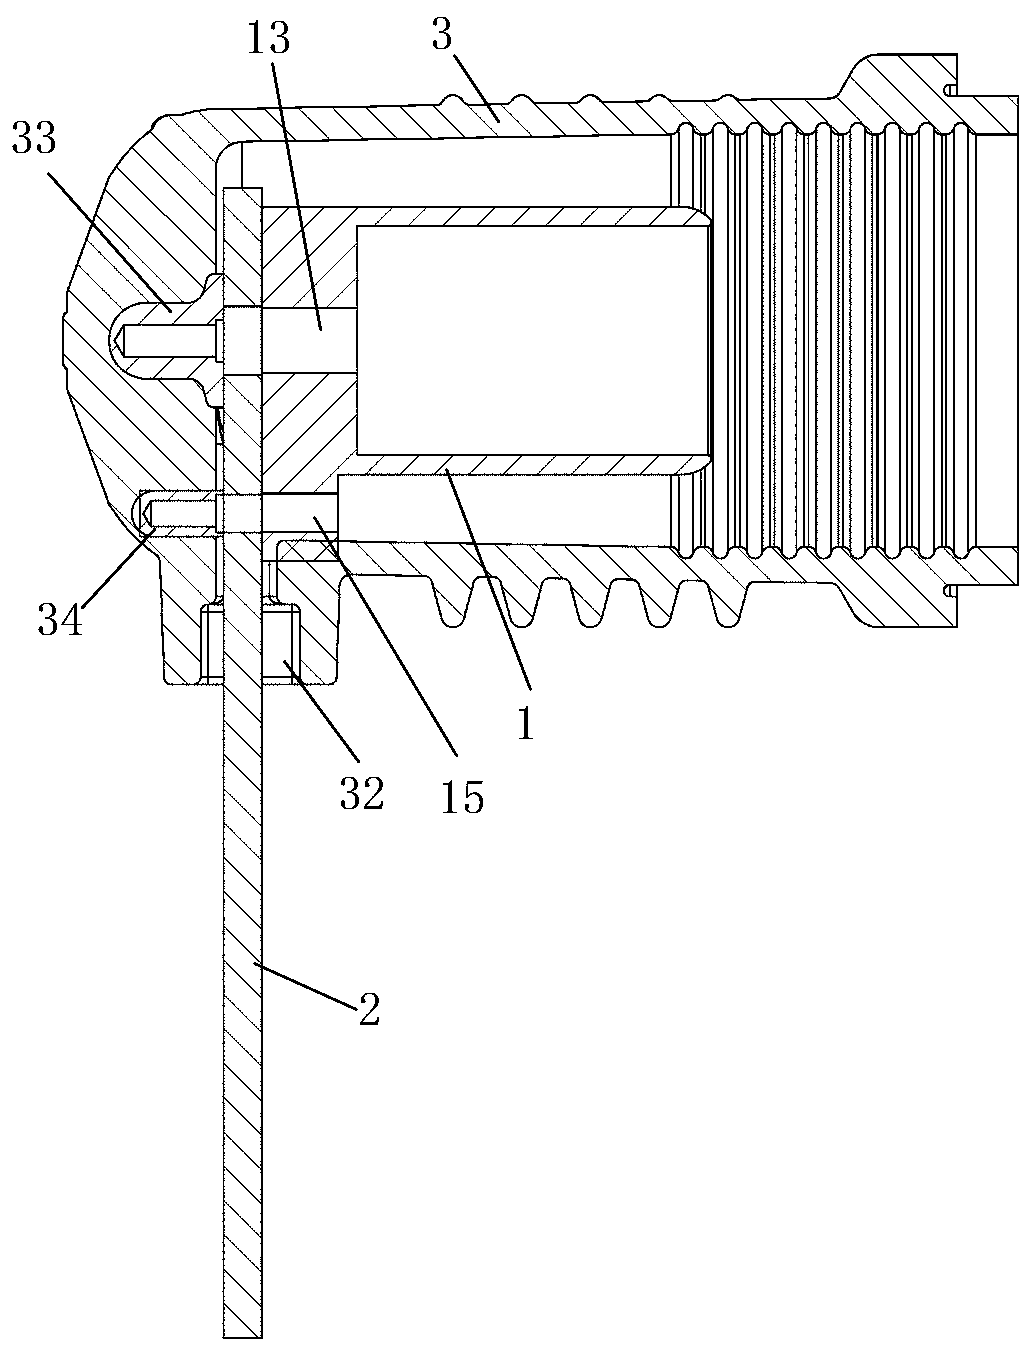 Static contact and switch cabinet using static contact